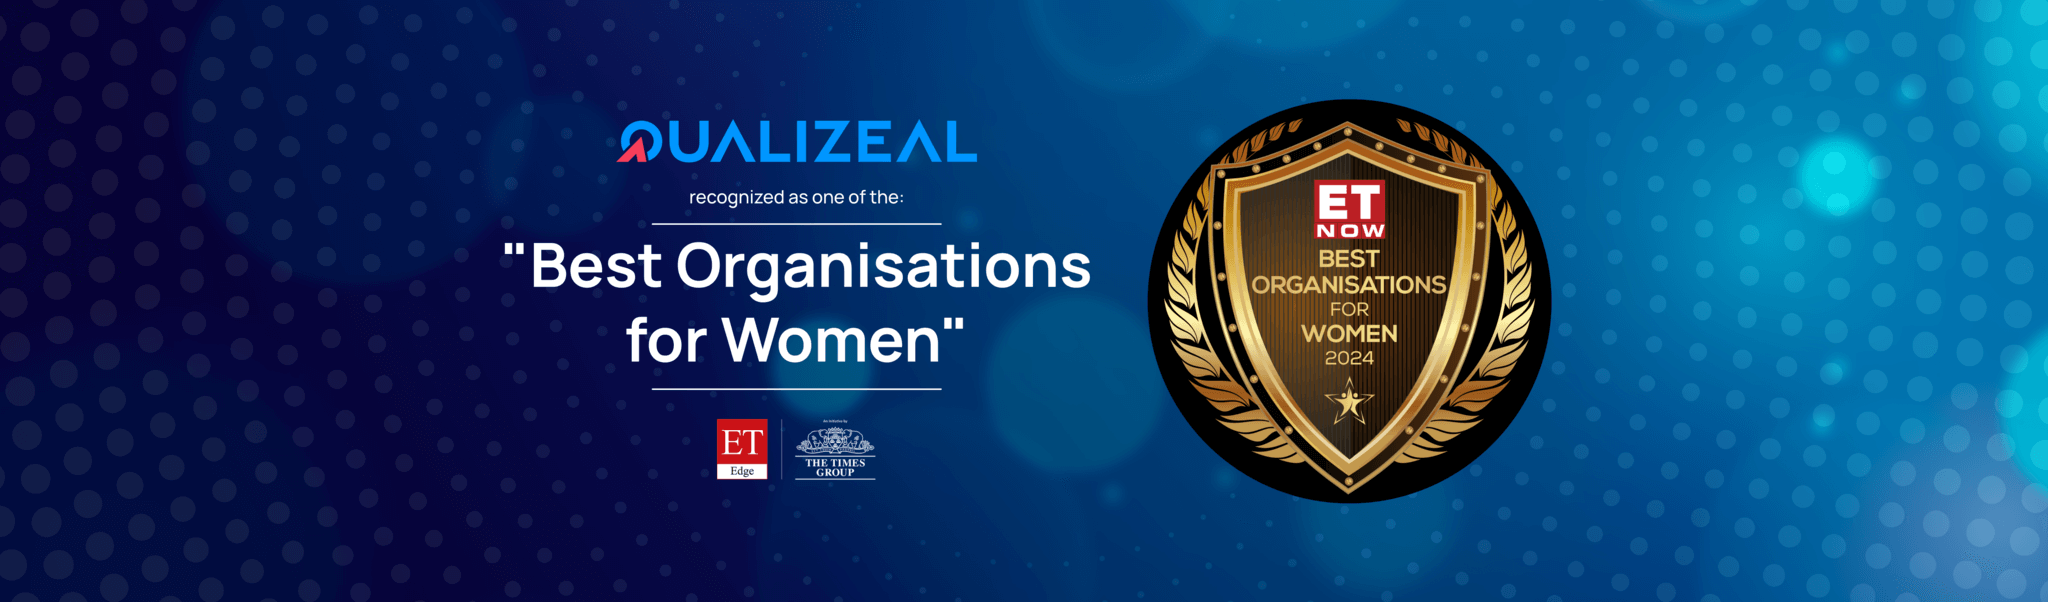 QualiZeal Awarded “Best Organisation for Women” by ET Edge